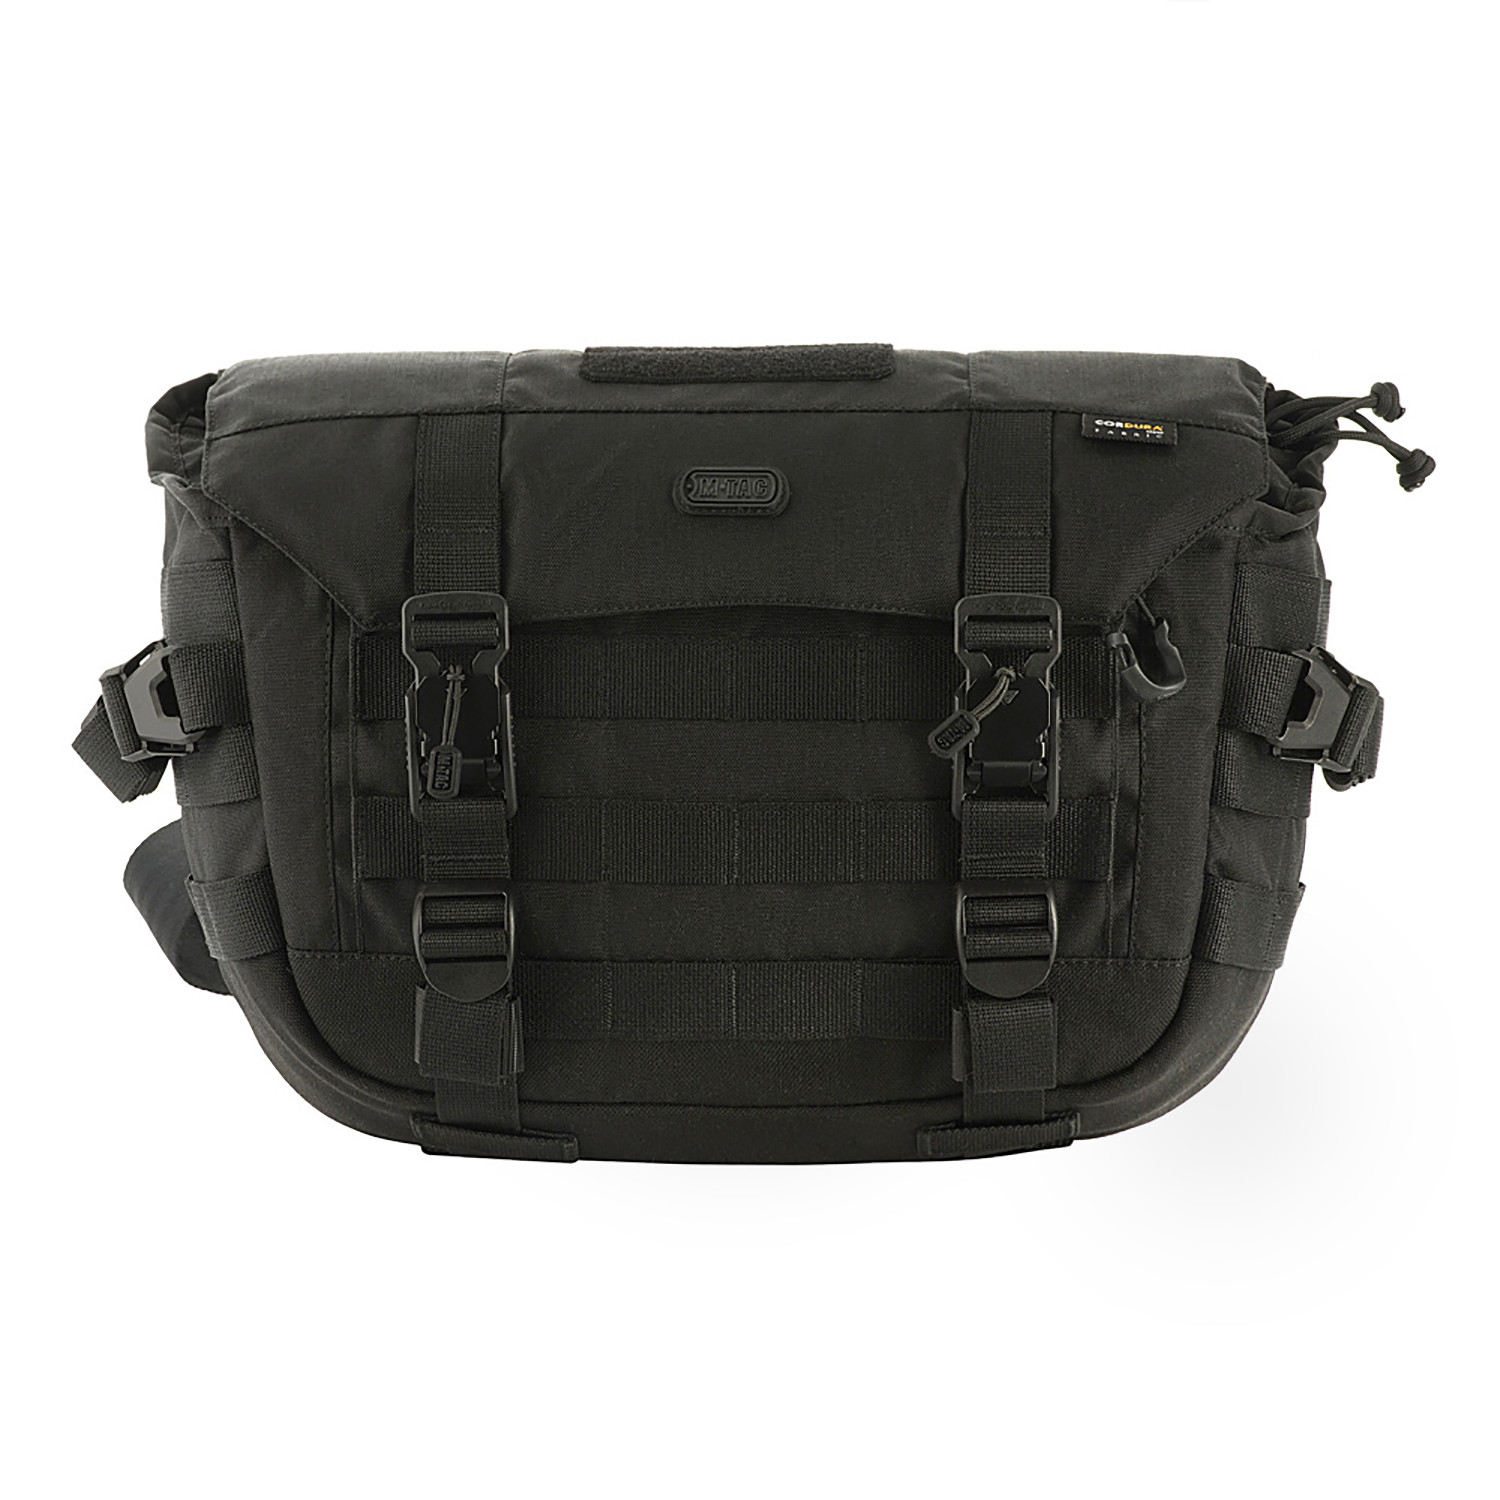 Cannes Bag // Black - M-Tac - Touch of Modern